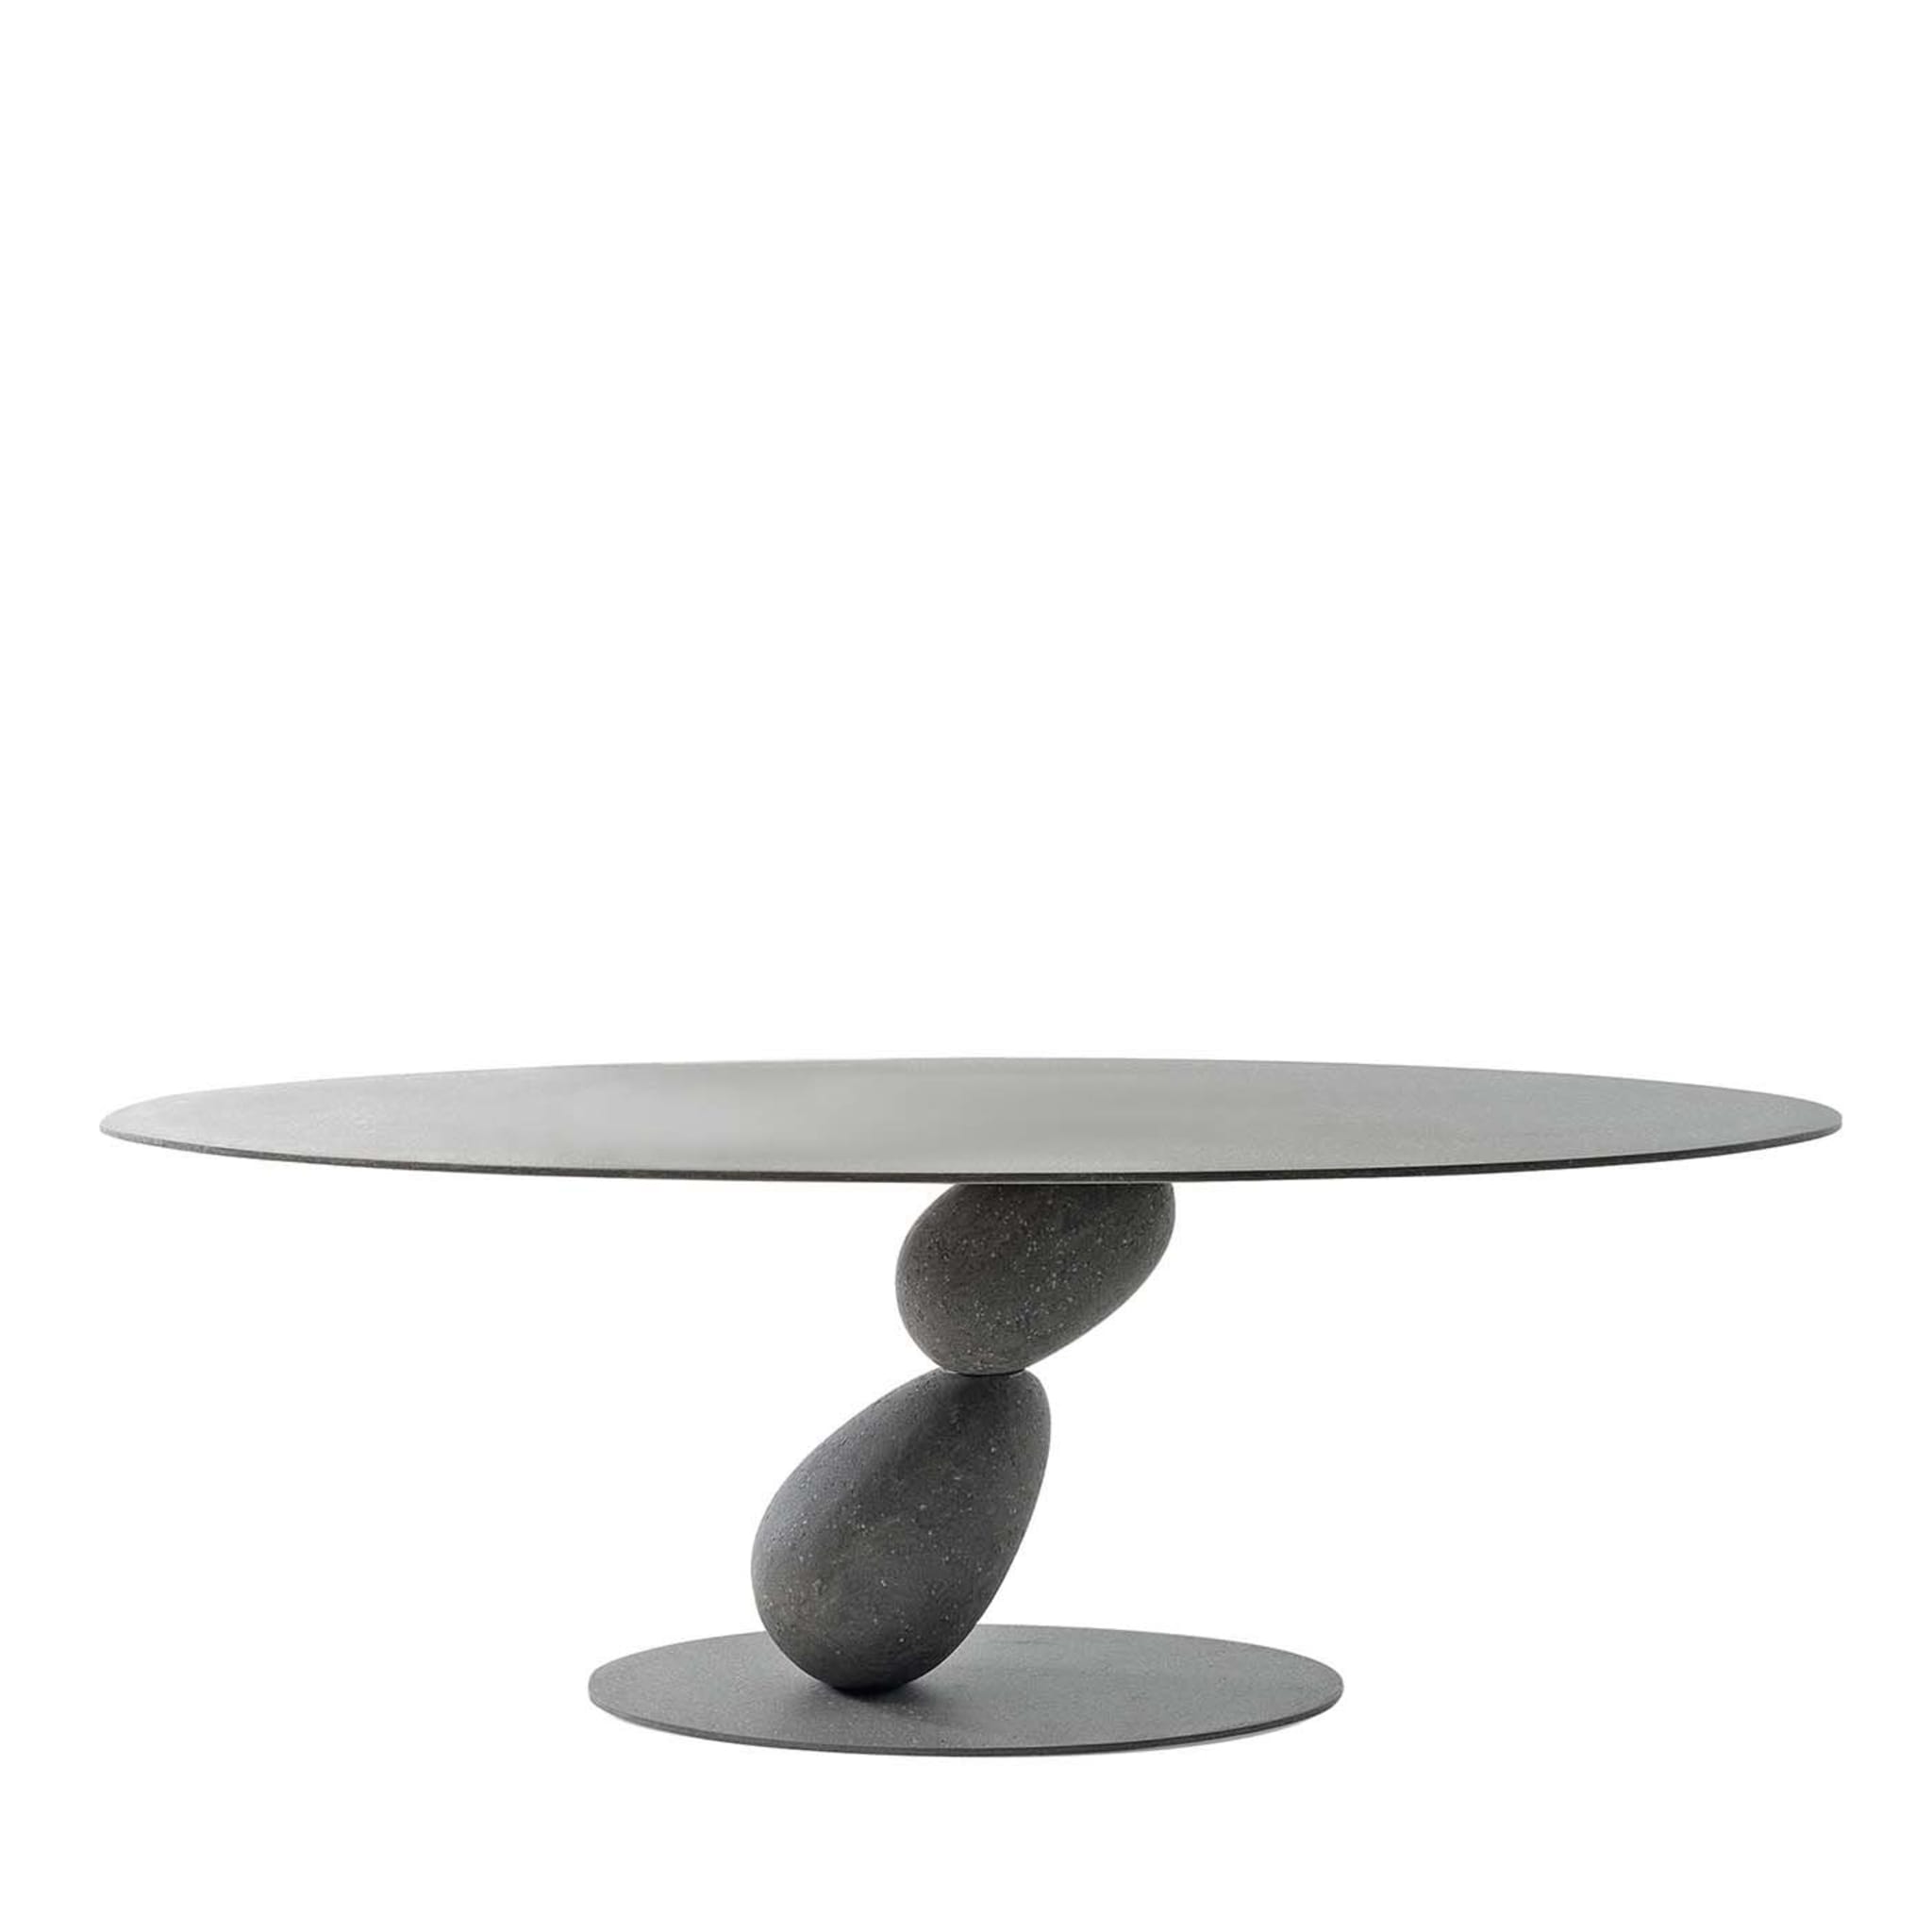 Matera Oval Dining Table by Sebastiano Tosi - Main view